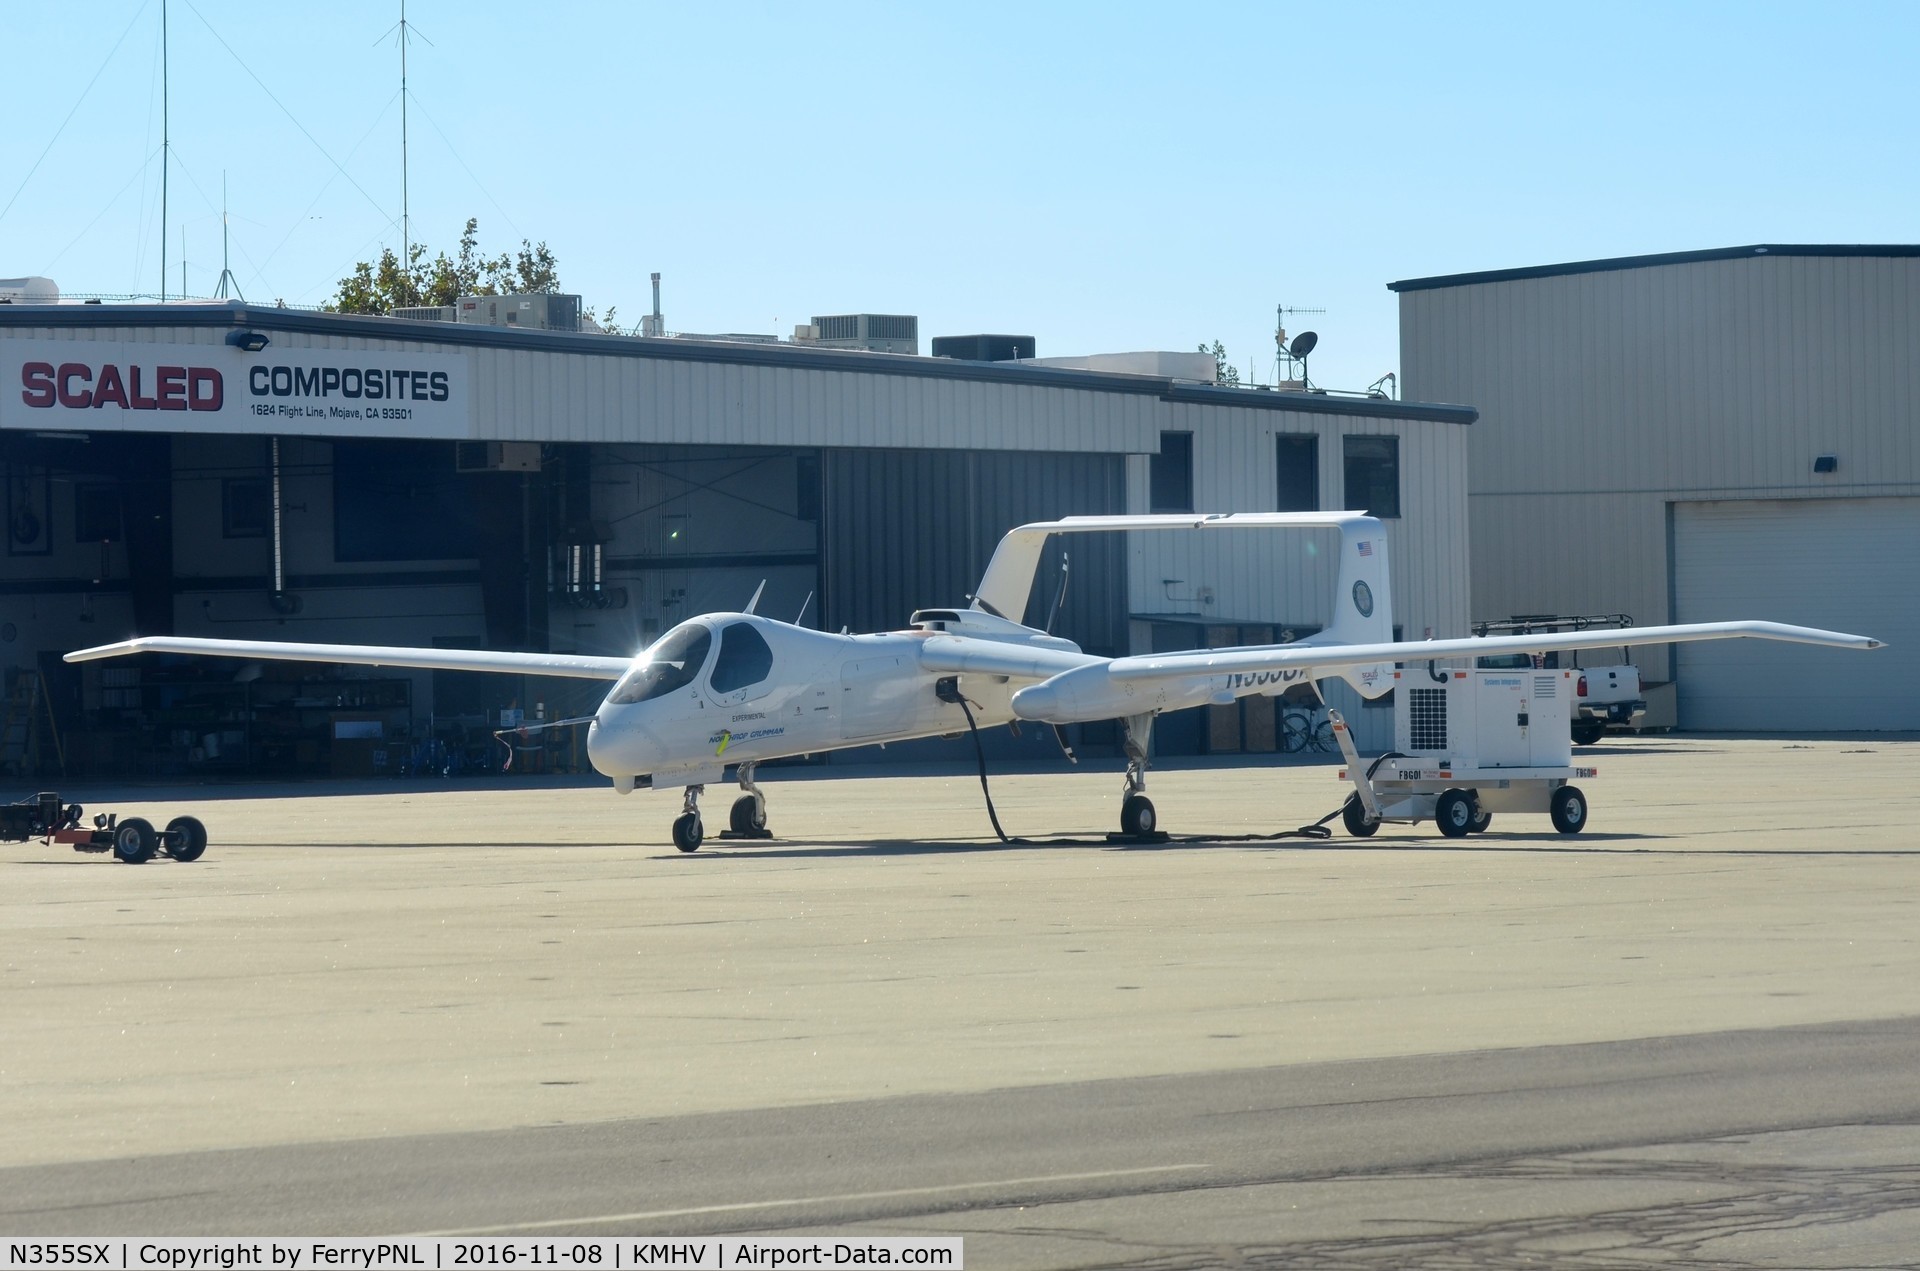 N355SX, Scaled Composites 355 C/N 001, Scaled compisites model 355